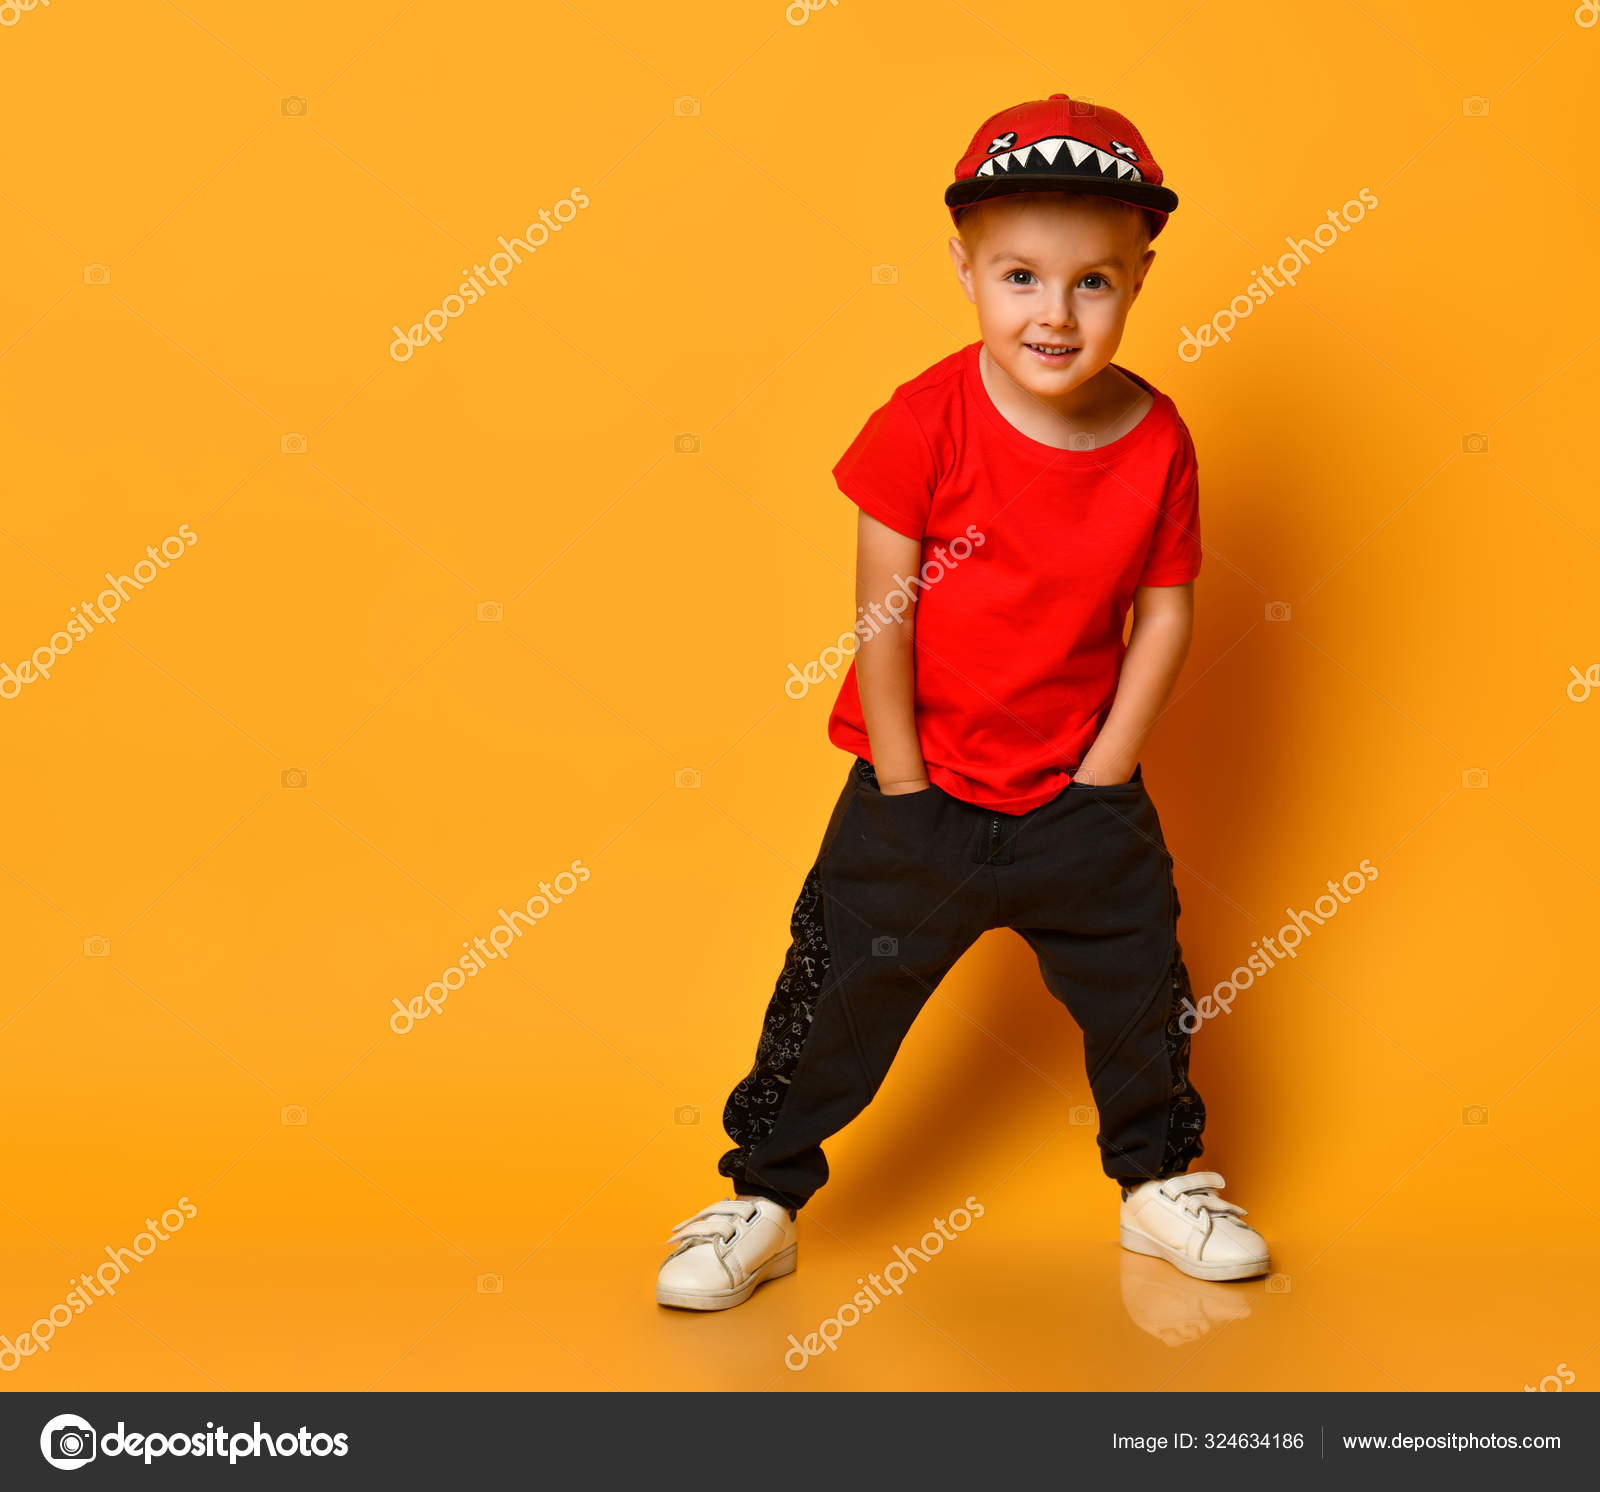 Young guy boy in a red T-shirt and dark pants, white sneakers and a funny cap on a free copy space a yellow background Stock Photo by ©ddkolos.gmail.com 324634186